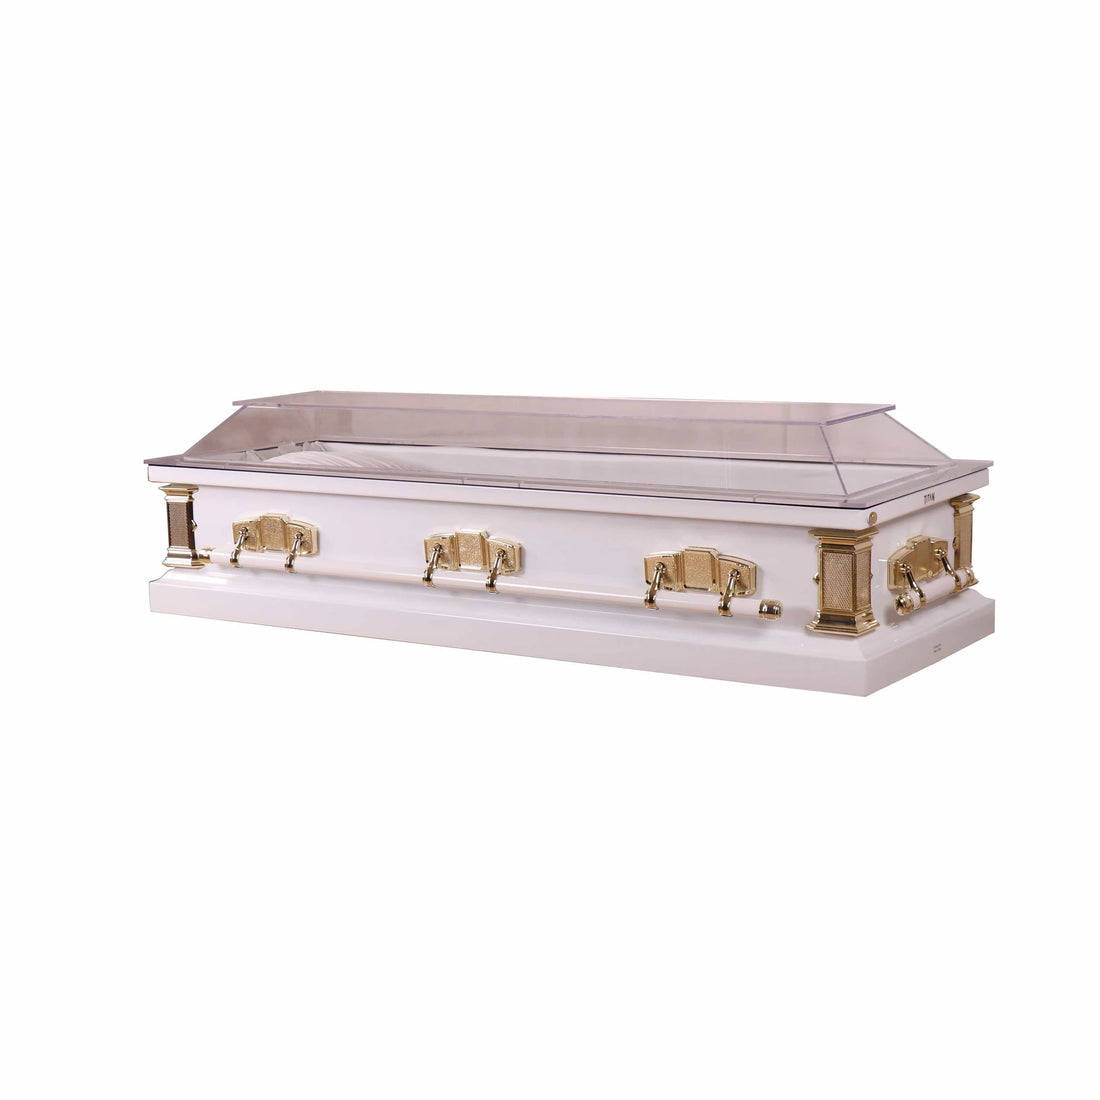 Benefits Of Buying A See-Through Clear Casket